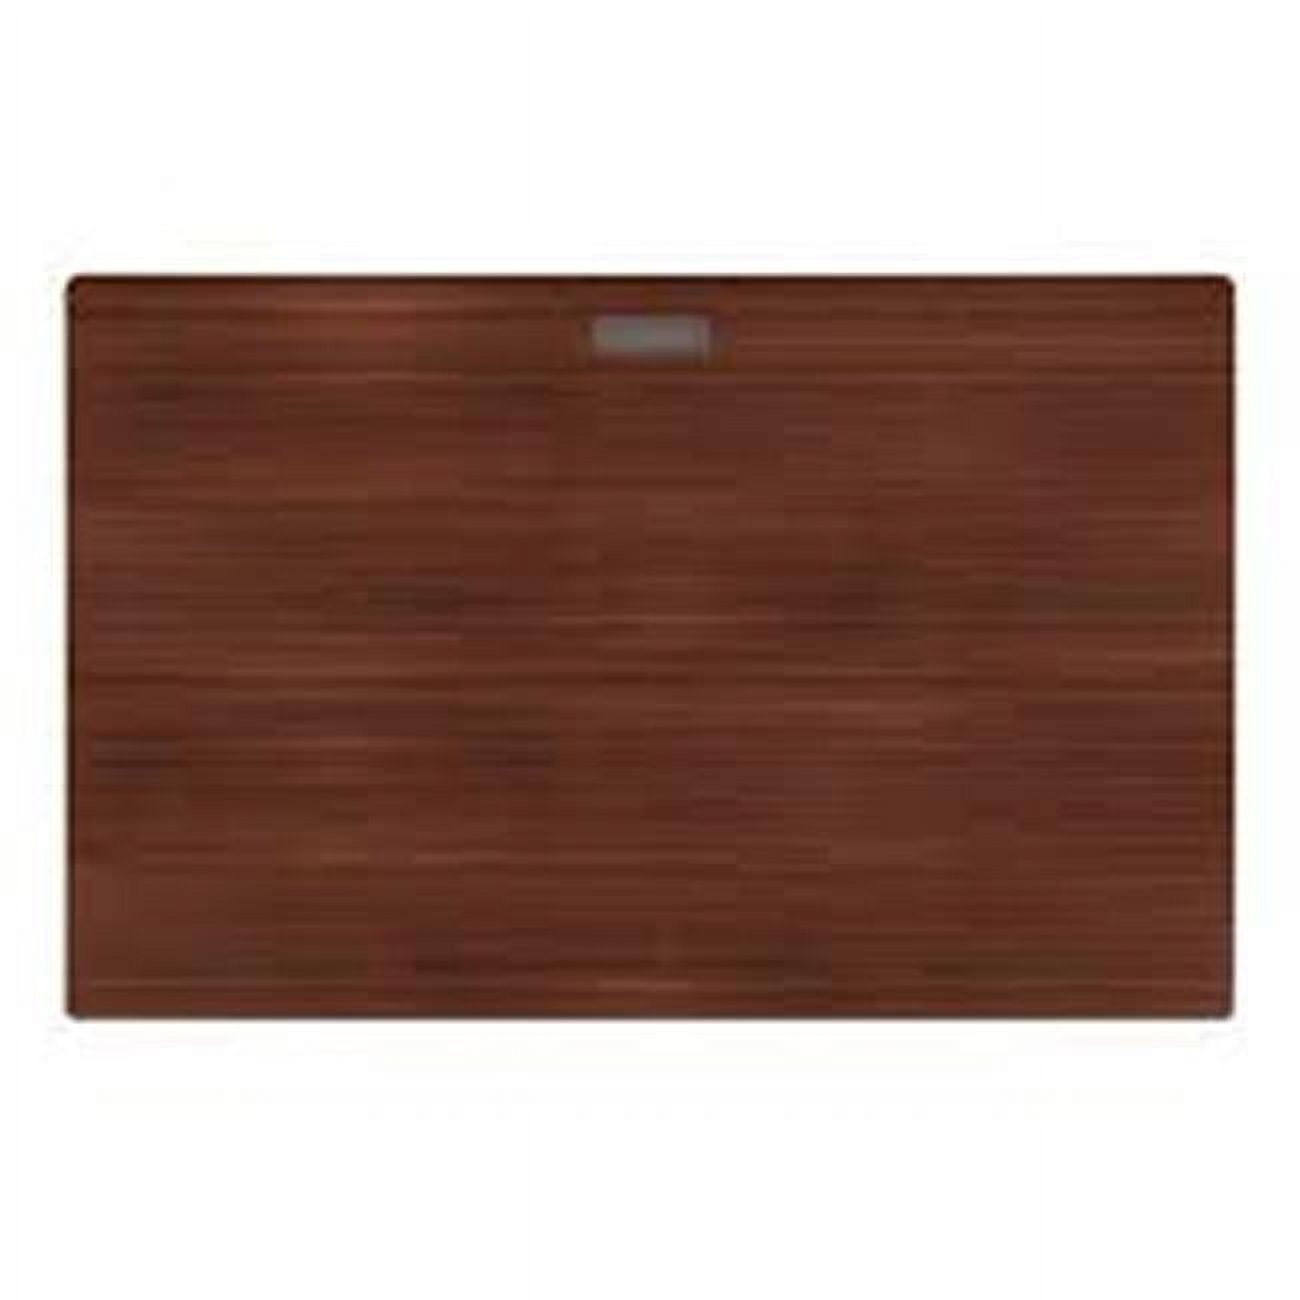 Picture of Blanco 232002 16 in. Precision Bowls Walnut Wood Compound Cutting Board